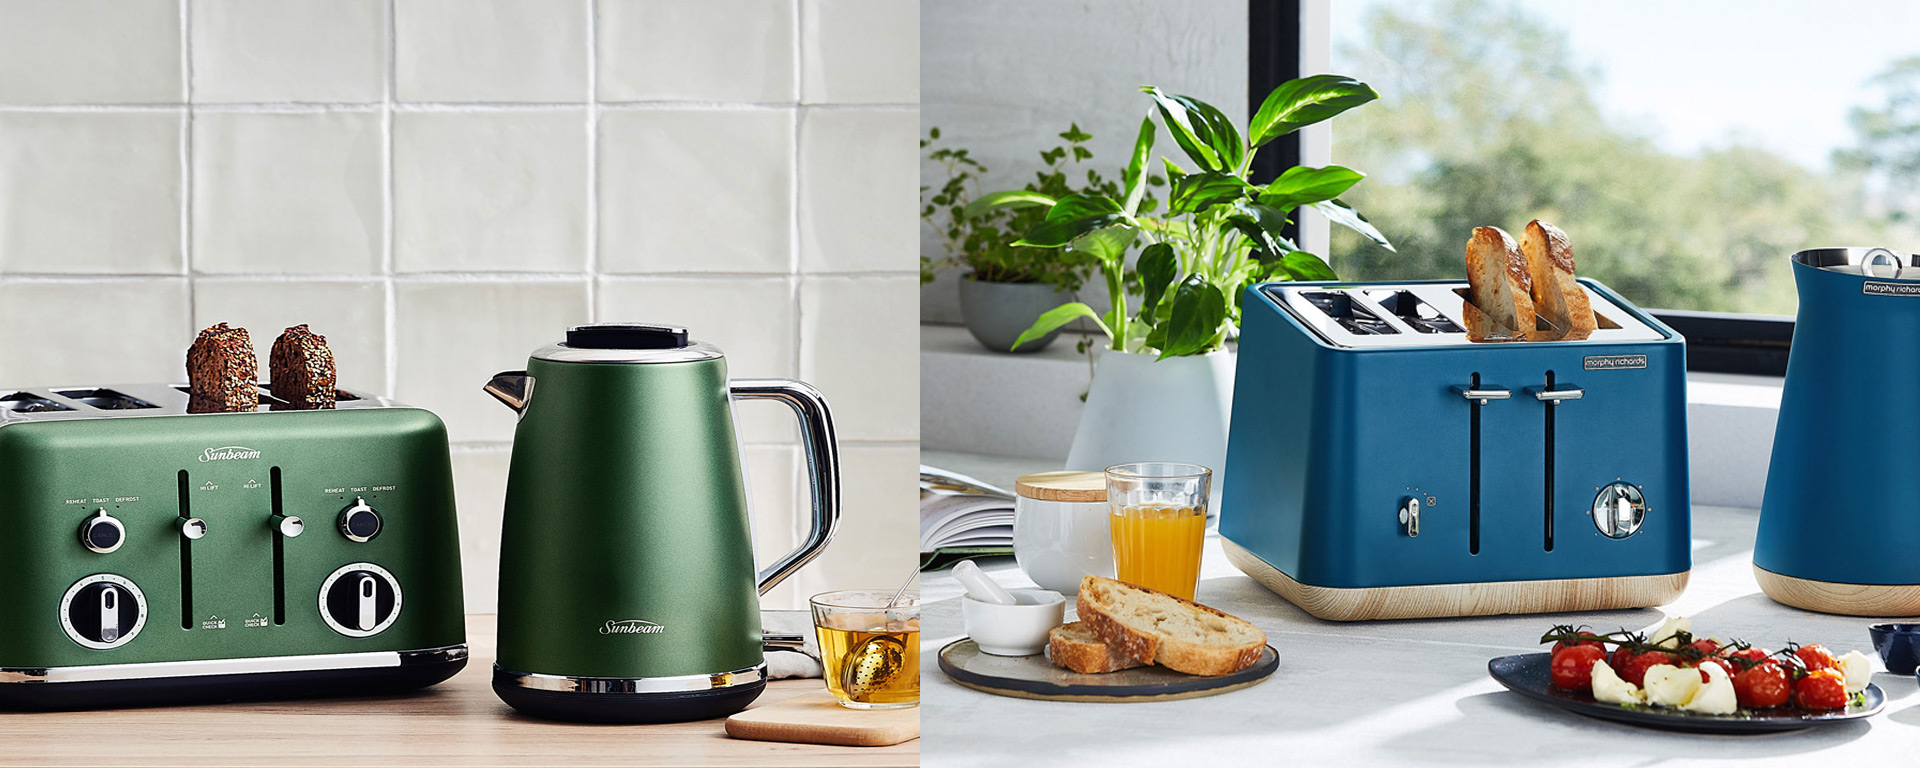 Stylish Toasters And Kettles 3 Colour Trends For Your Kitchen